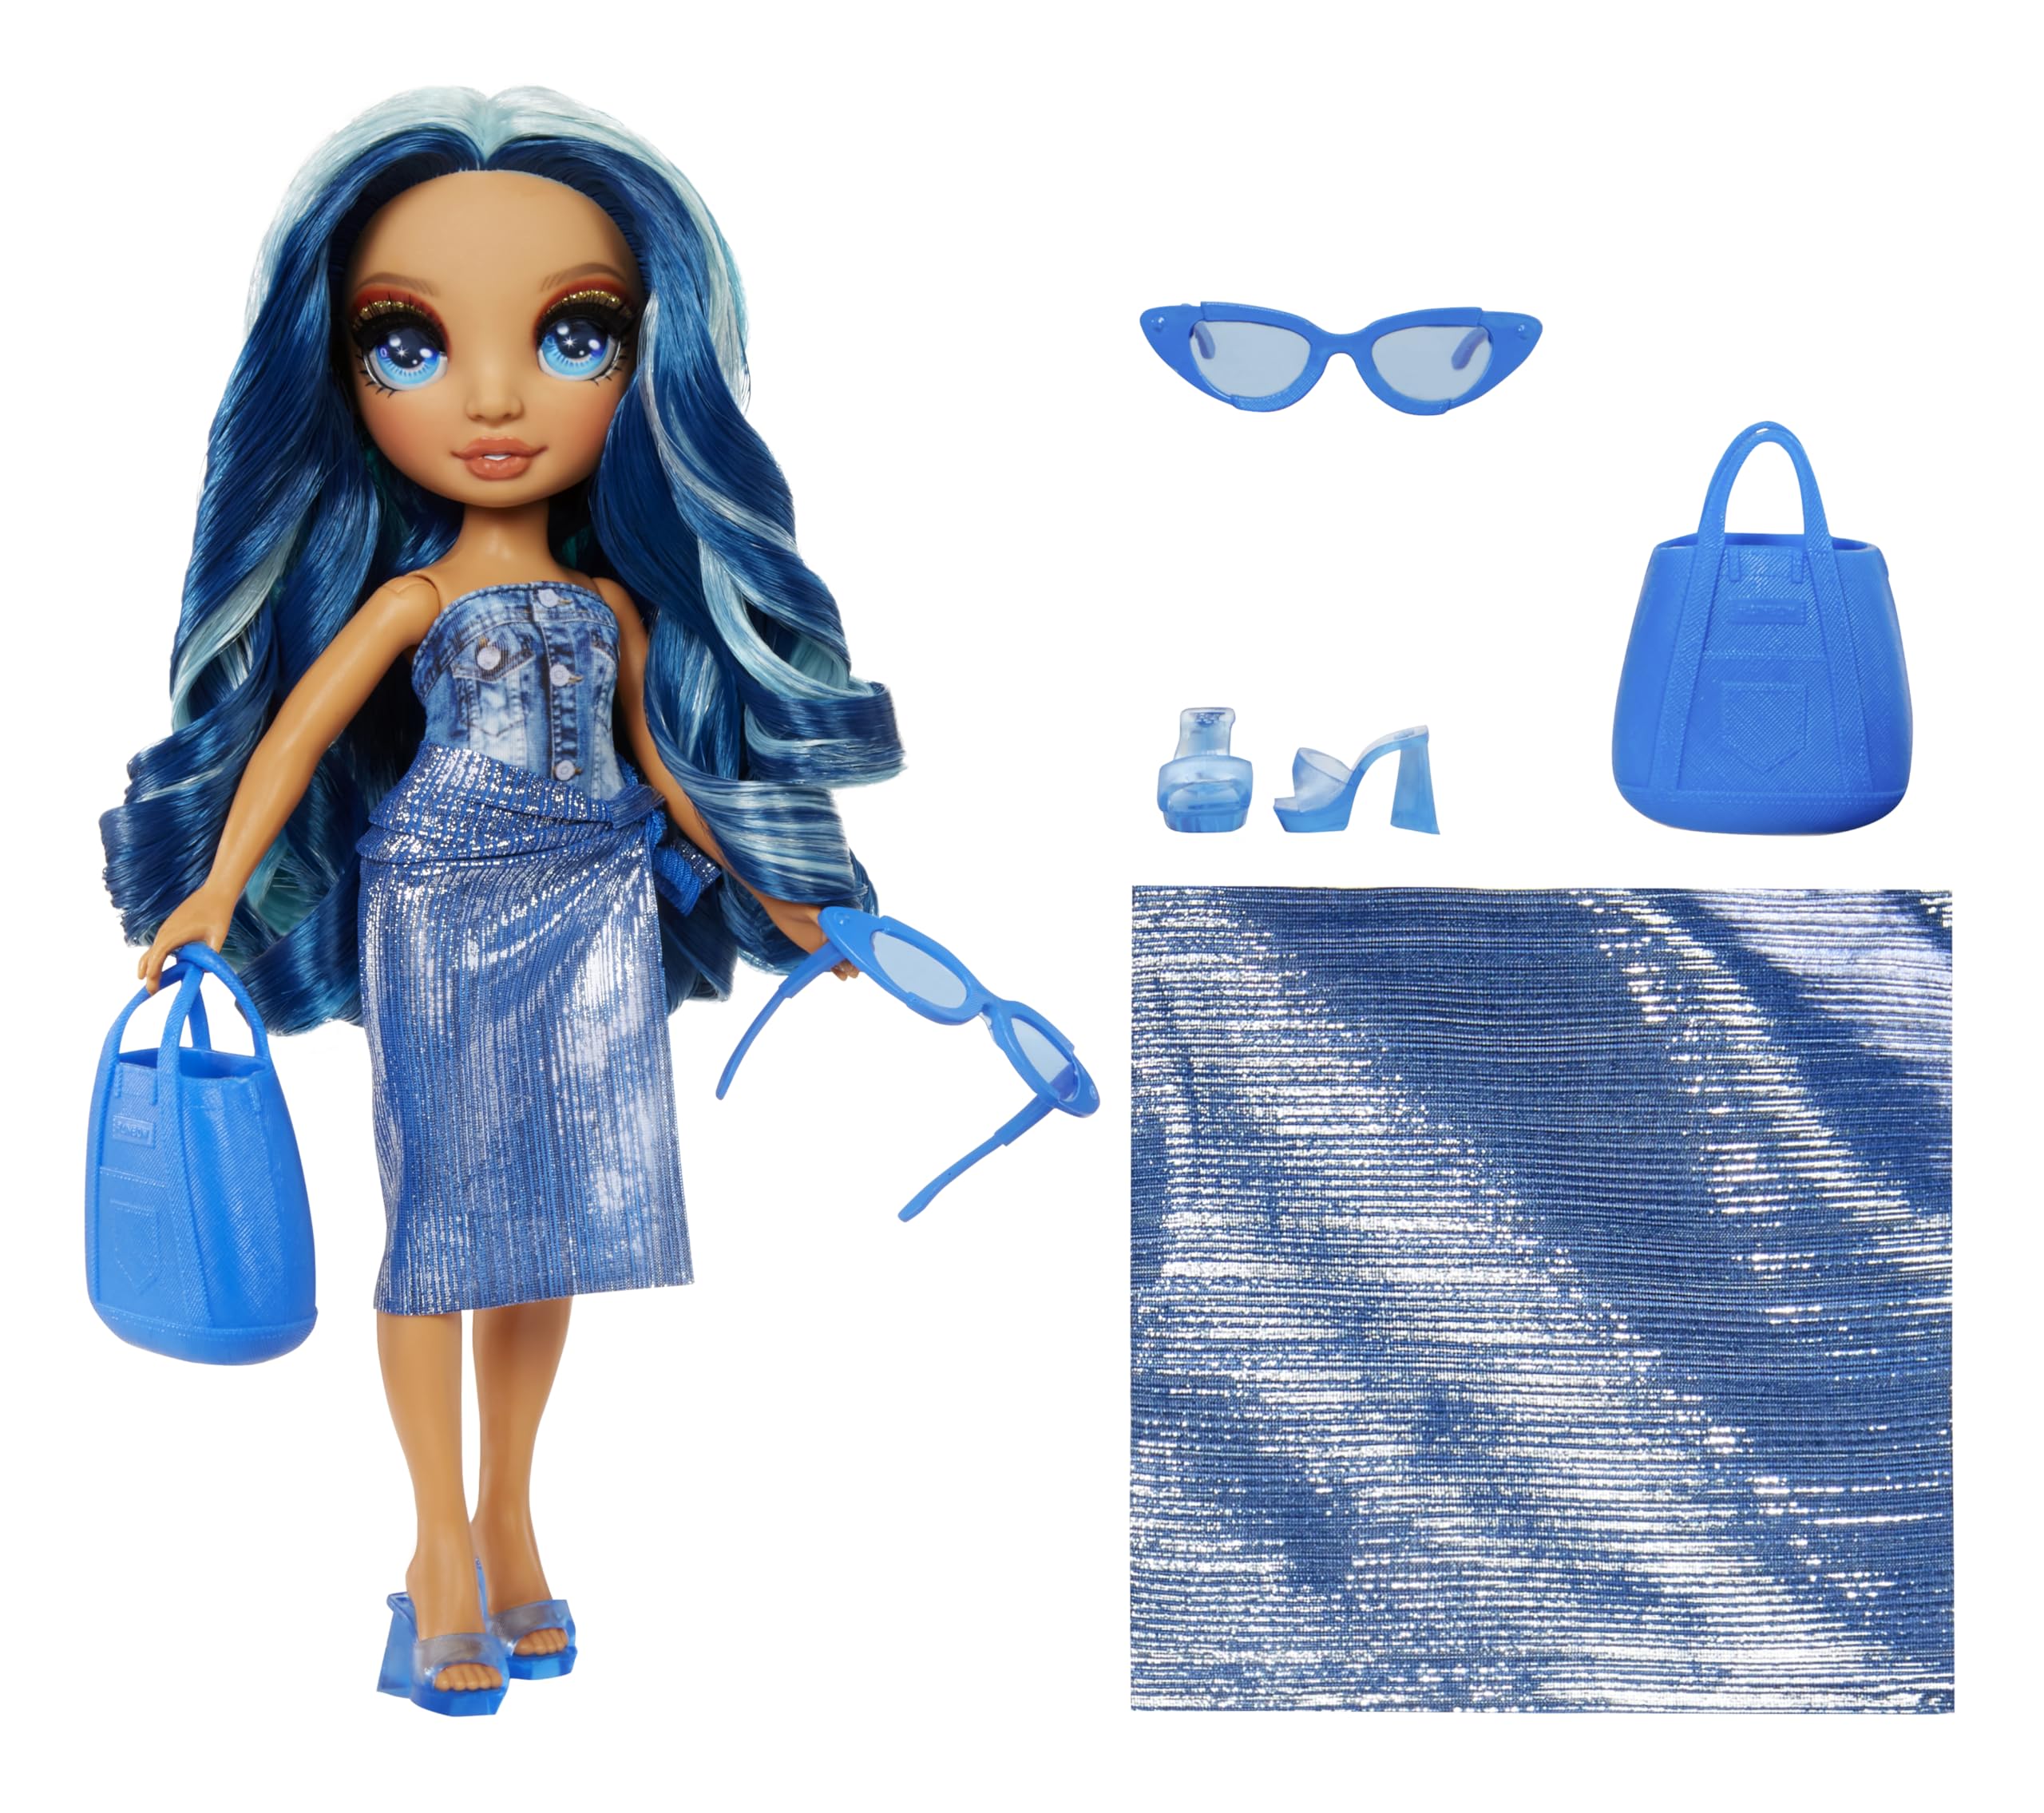 Rainbow High Swim & Style Skyler (Blue) 11” Doll with Shimmery Wrap to Style 10+ Ways, Removable Swimsuit, Sandals, Fun Play Accessories. Kids Toy Gift Ages 4-12 Years